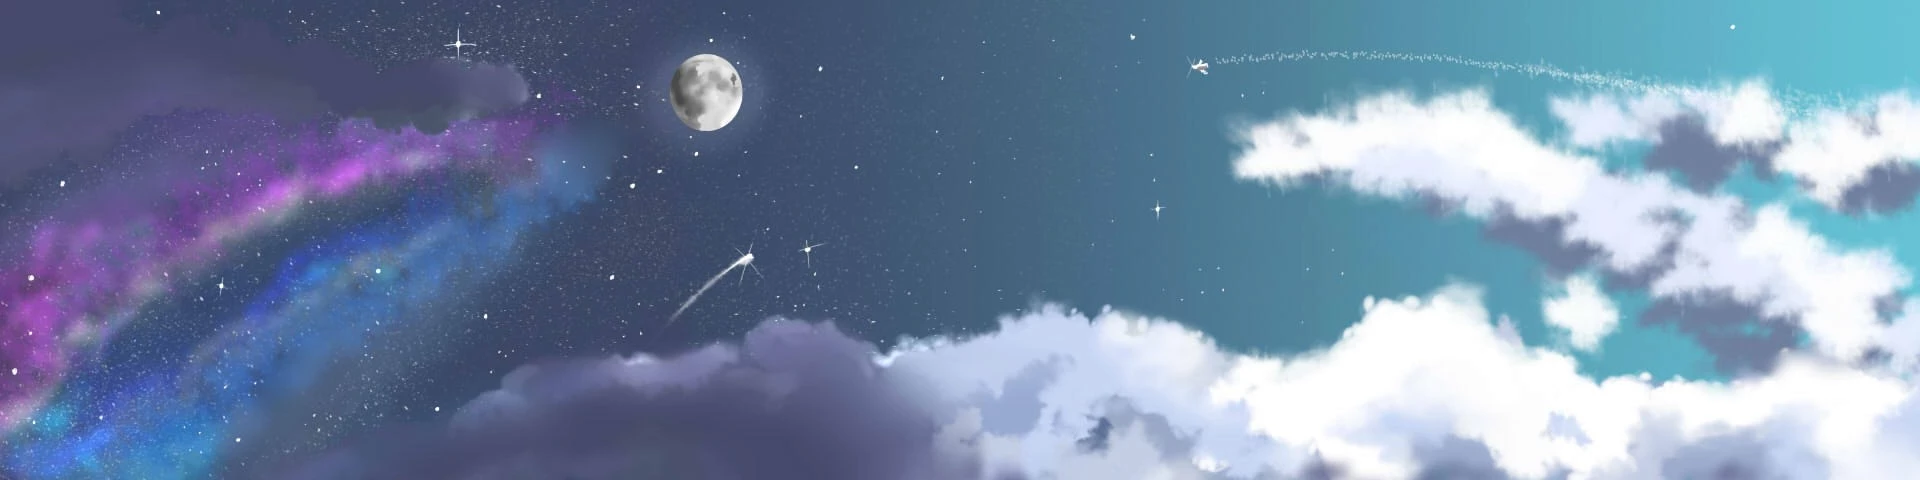 banner illustration day night milkyway clouds